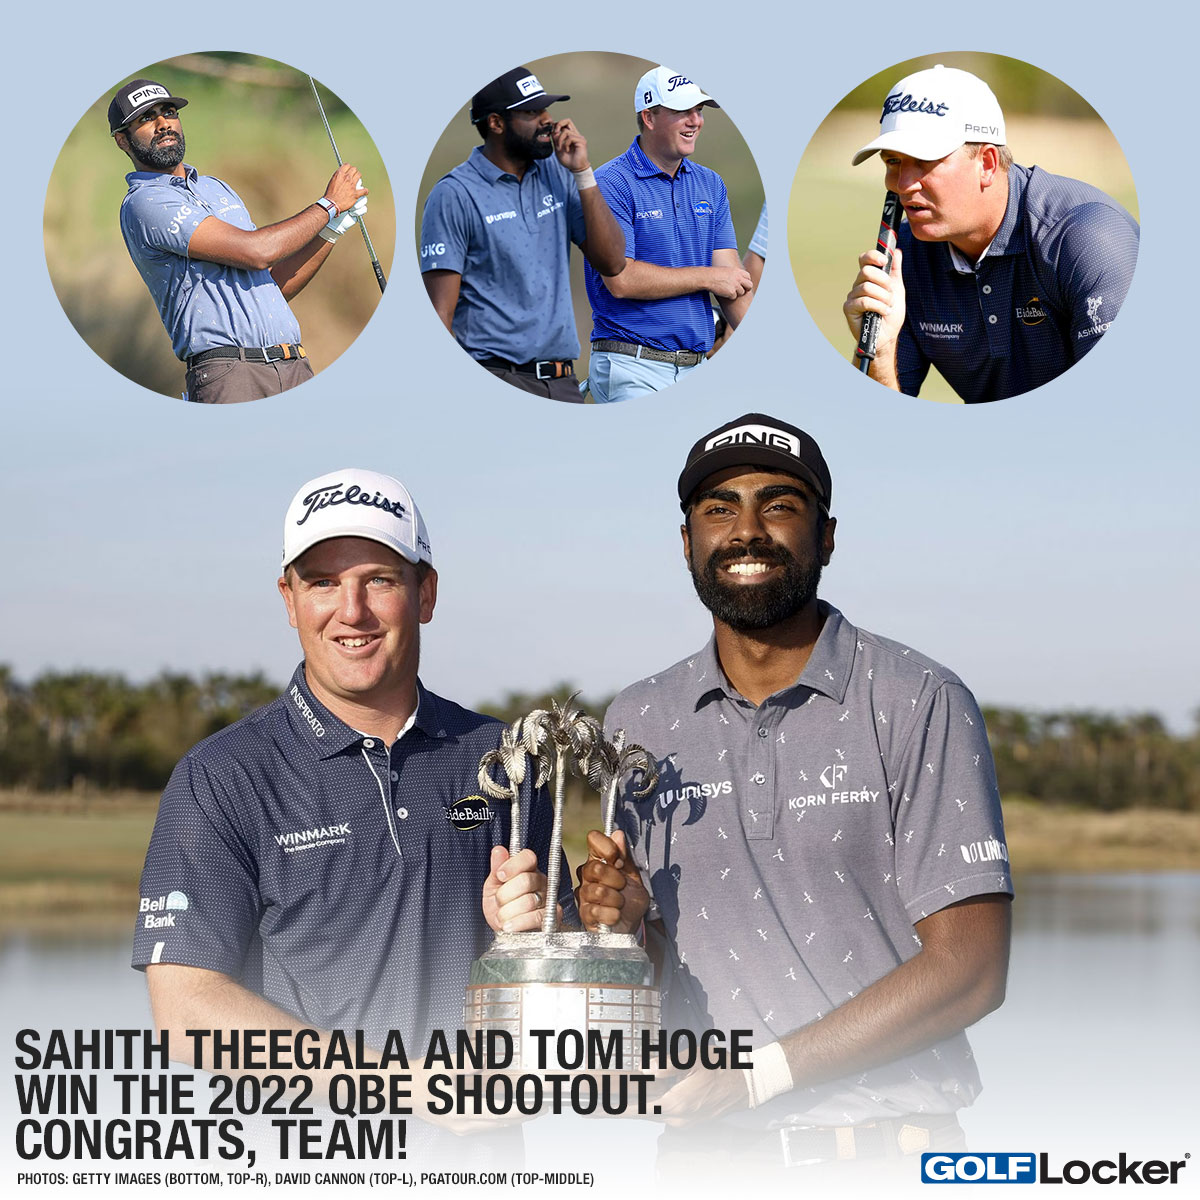 Sahith Theegala and Tom Hoge Win the 2022 QBE Shootout. Congrats, Team!